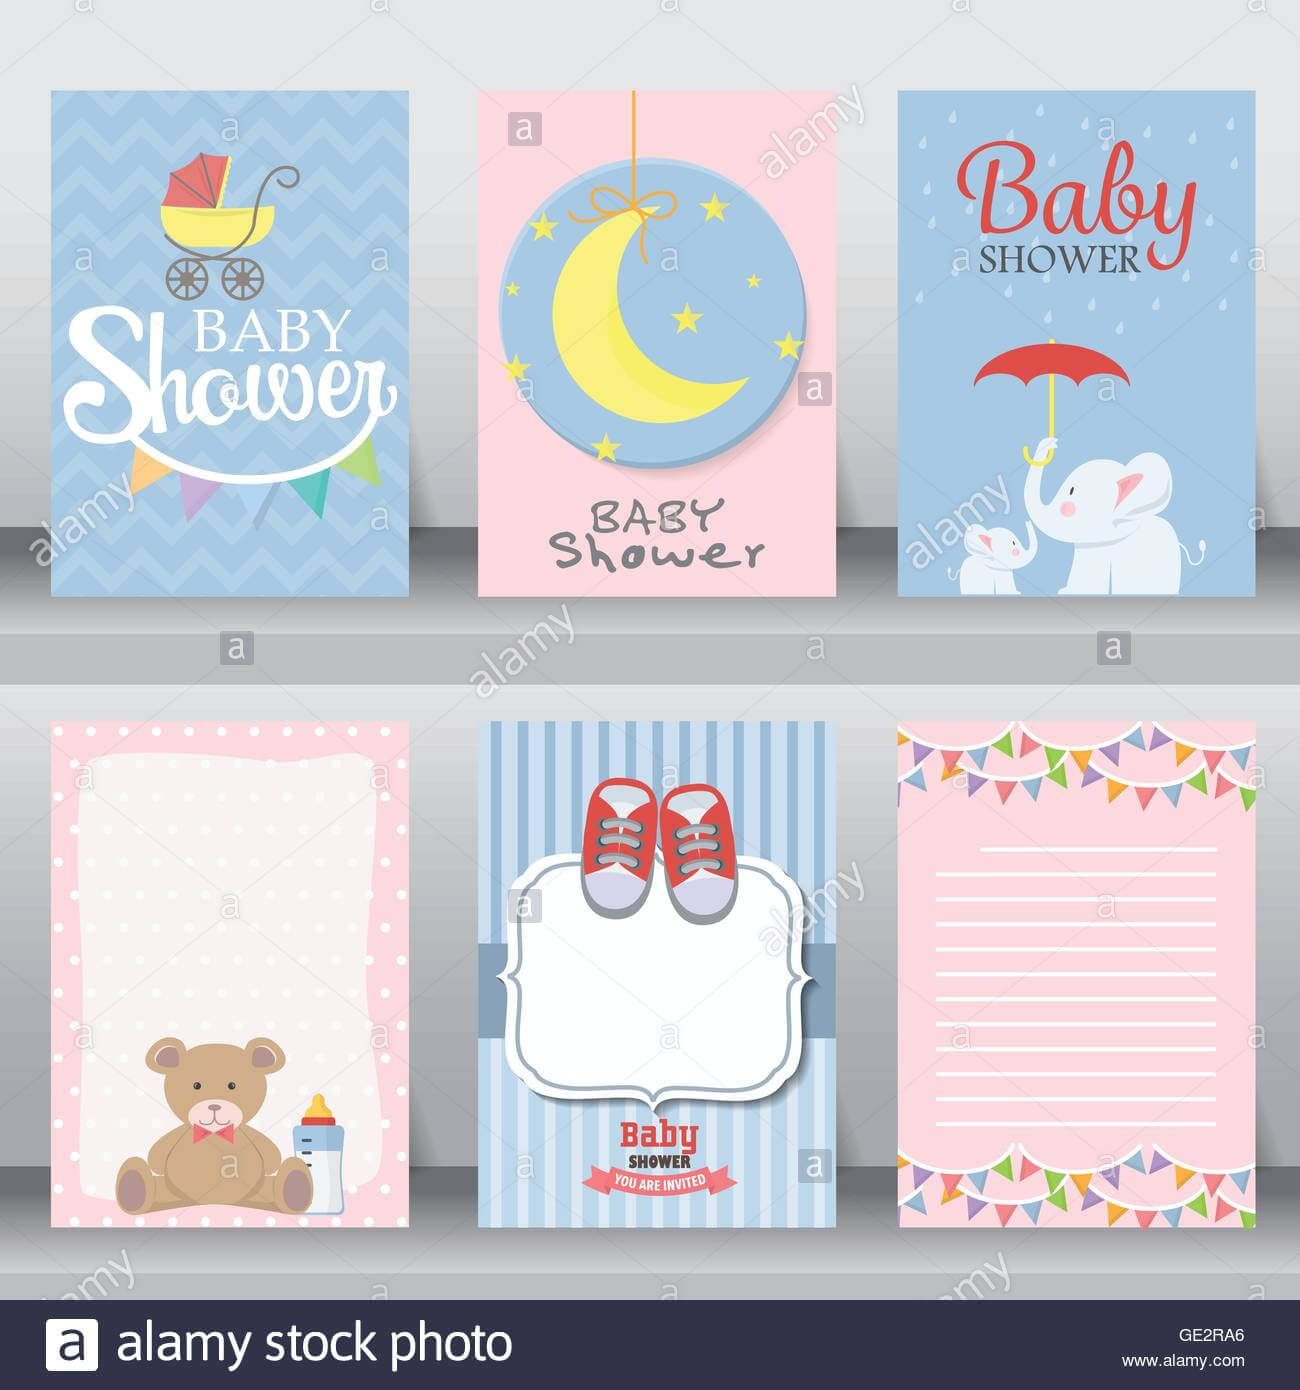 Baby Shower Party Greeting And Invitation Card. Layout Inside Greeting Card Layout Templates